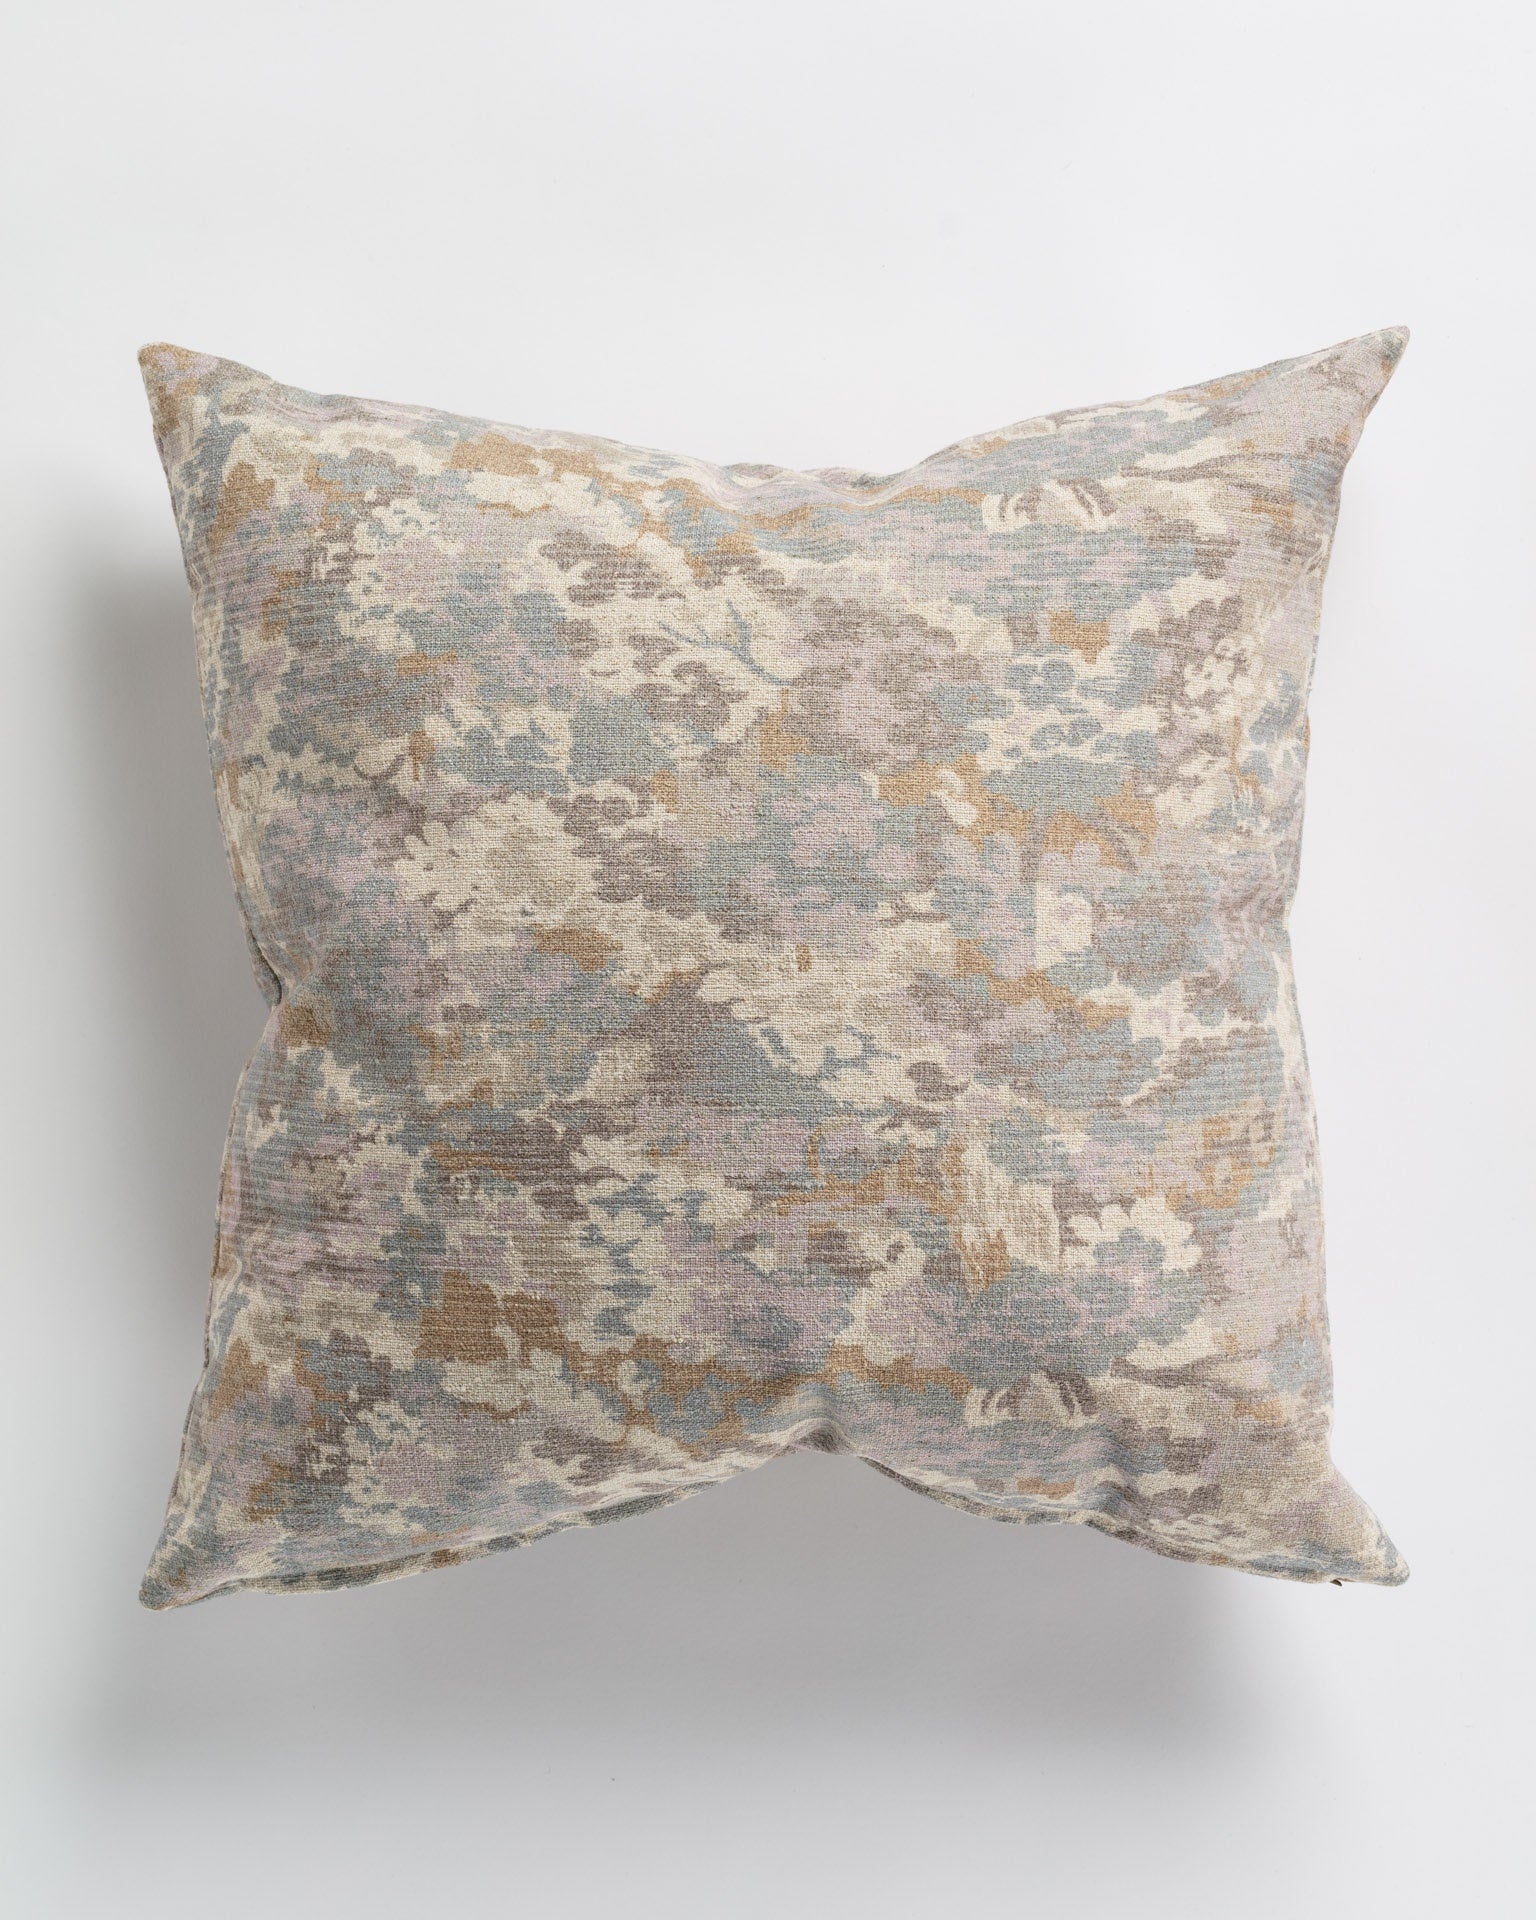 Decorative &quot;Imperial Pastel Pillow 26x26&quot; with a muted floral pattern in shades of beige, gray, and pale blue on a white background, perfect for a Scottsdale Arizona bungalow. The texture appears soft and plush. (Gabby)